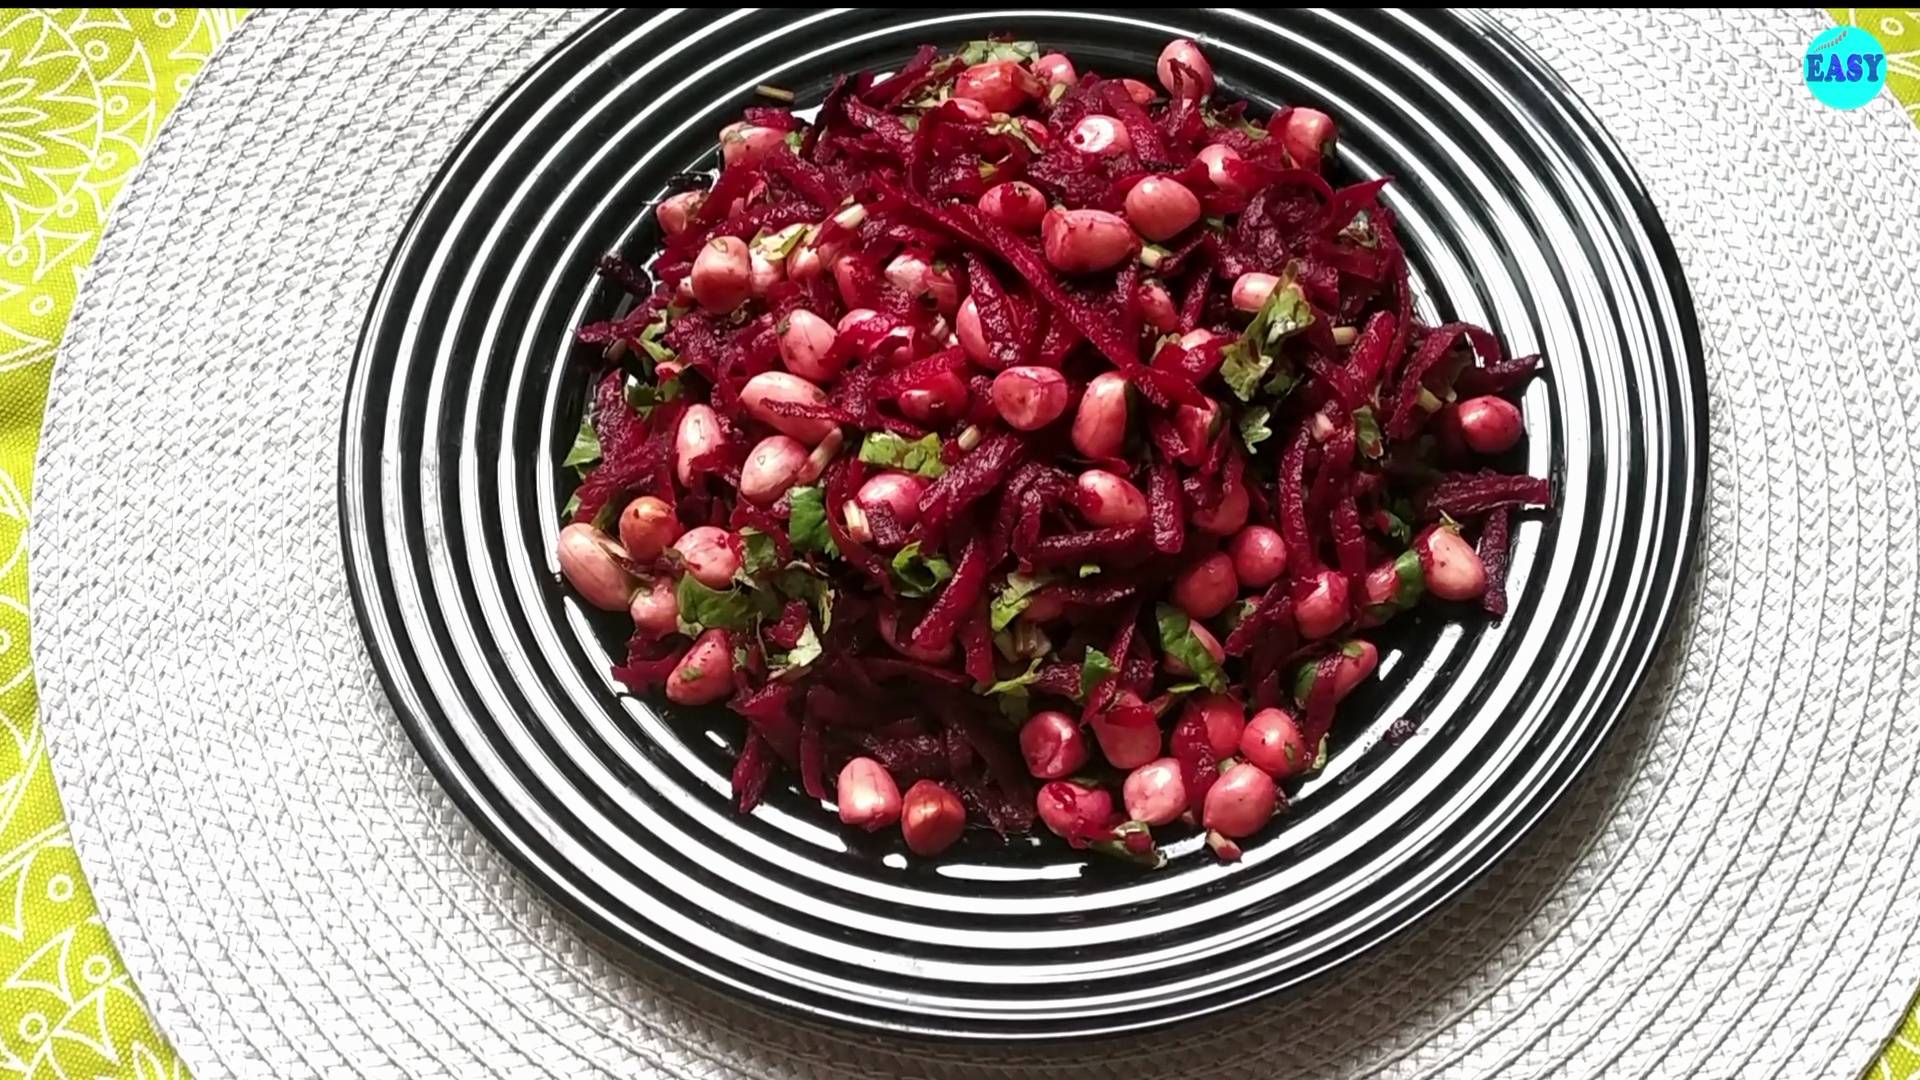 Step 4 - Your healthy beetroot salad is ready. Enjoy  it with your meal or replace your meal with this healthy and detoxing salad.